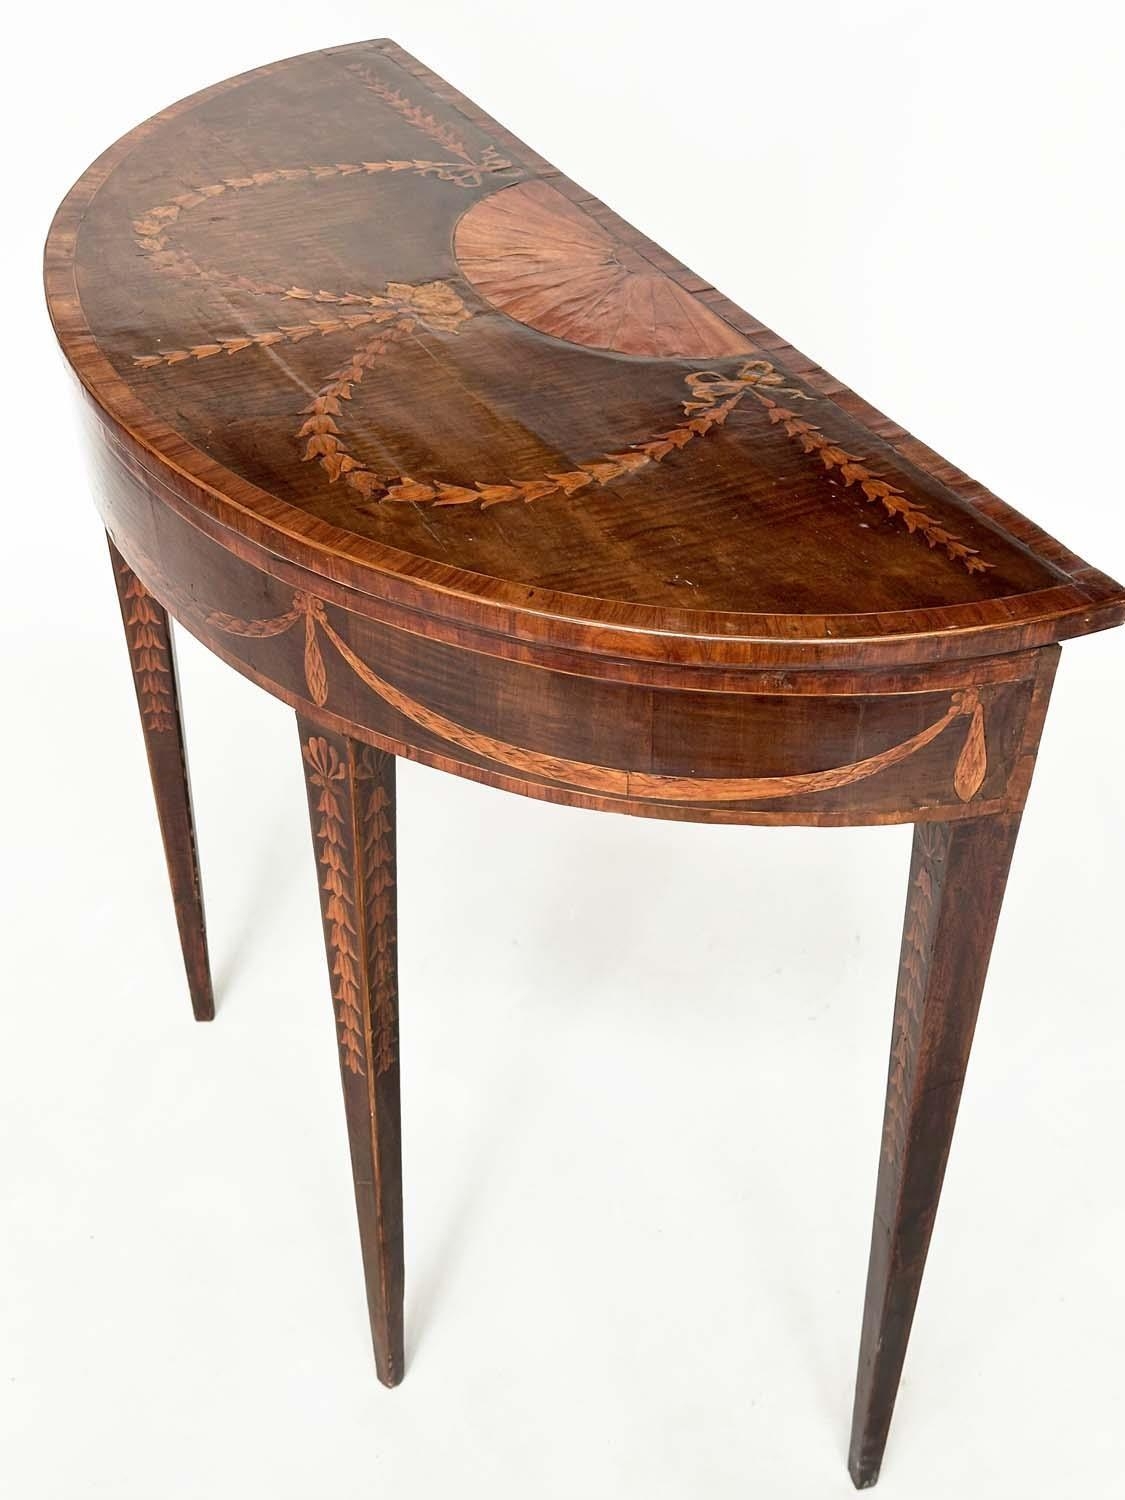 DEMI LUNE SIDE TABLE, George III, probably Irish, fiddle back mahogany and satinwood marquetry - Image 4 of 16